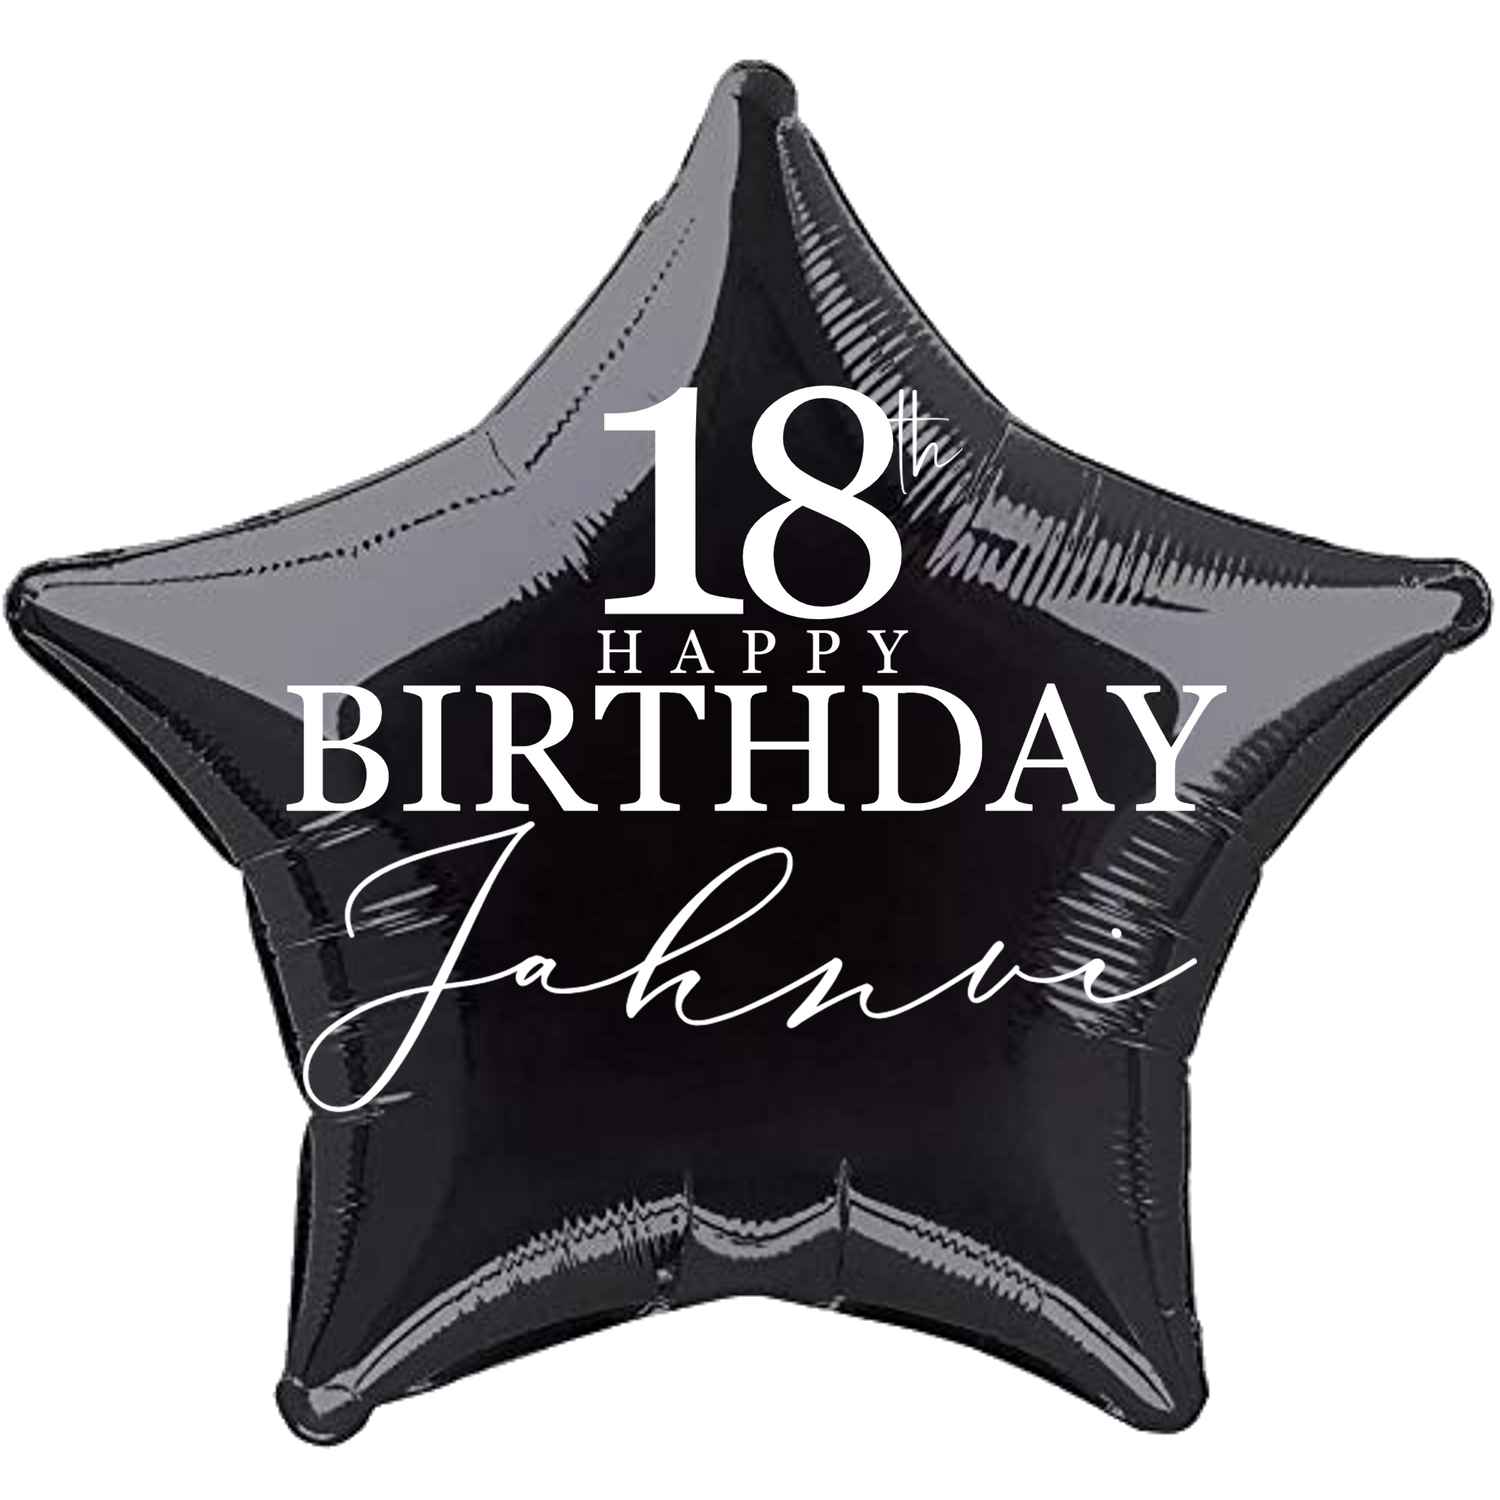 Personalized/Customized Custom Name/Text & Age Black Star Foil/Mylar Balloons For Six Months/First/Second/Third/Sixteenth/Twenty-First/Thirty/Forty/Fifty/Sixty/Seventieth Birthday, Milestone Birthday or a Special Themed Birthday Event. Supports Helium/Air, Luxury Bespoke Balloons Are a Perfect Surprise For Your Baby, Wife, Mom, Dad, Brother, Sister, Friends & Loved Ones